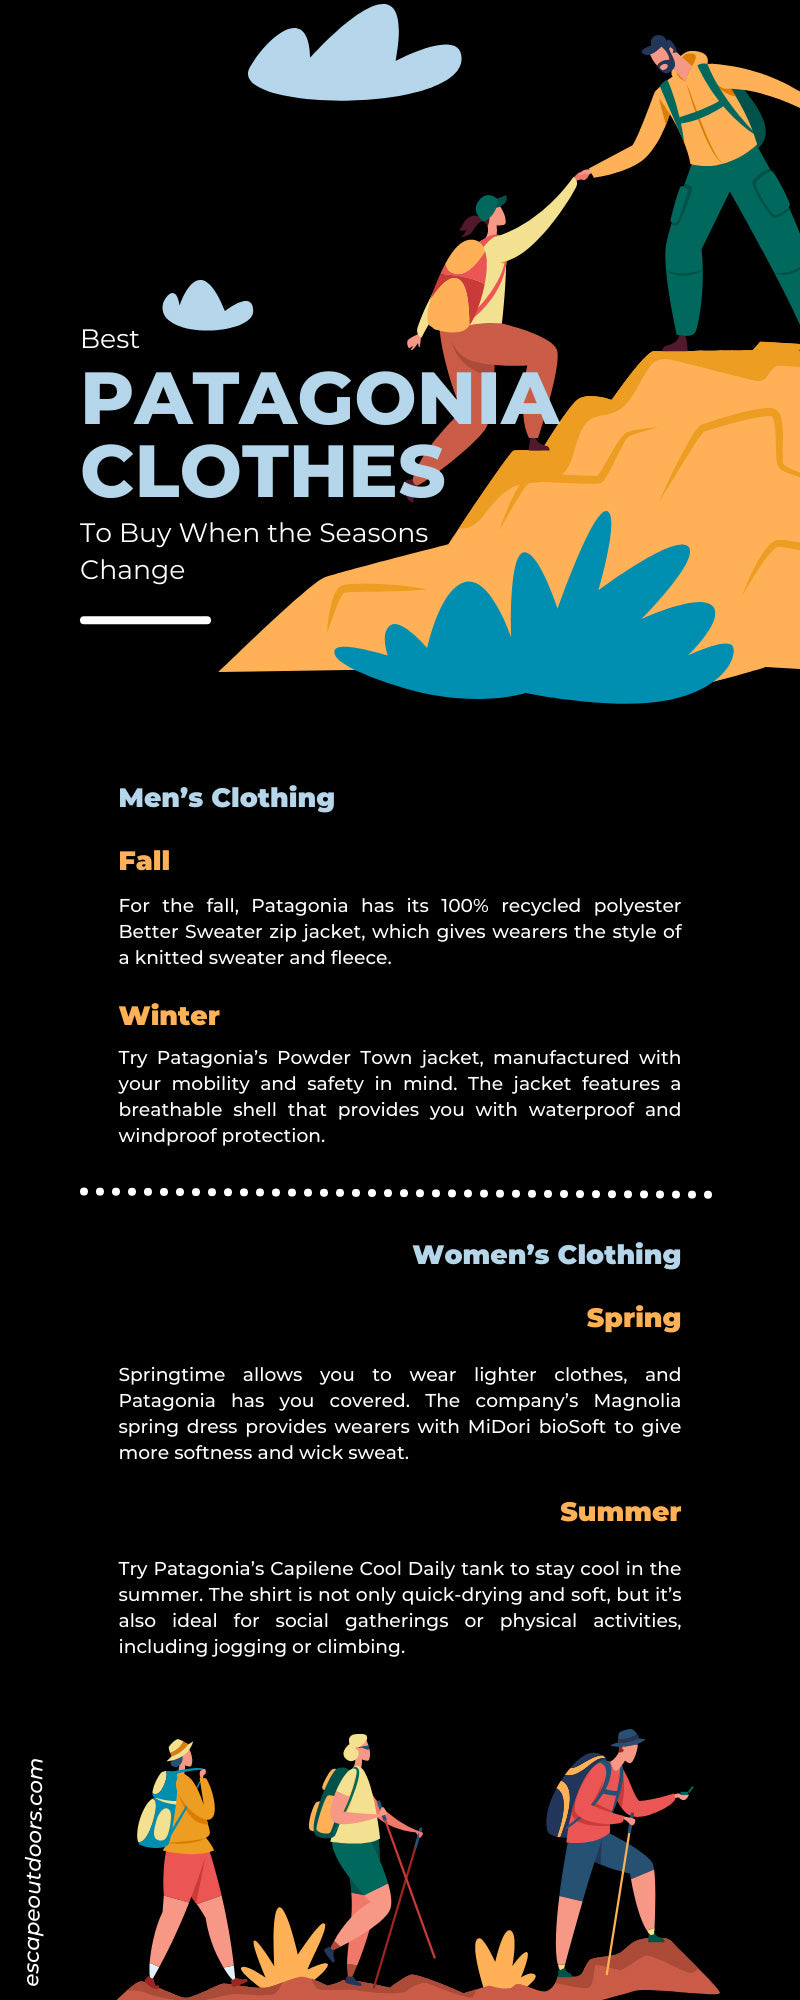 Best Patagonia Clothes To Buy When the Seasons Change